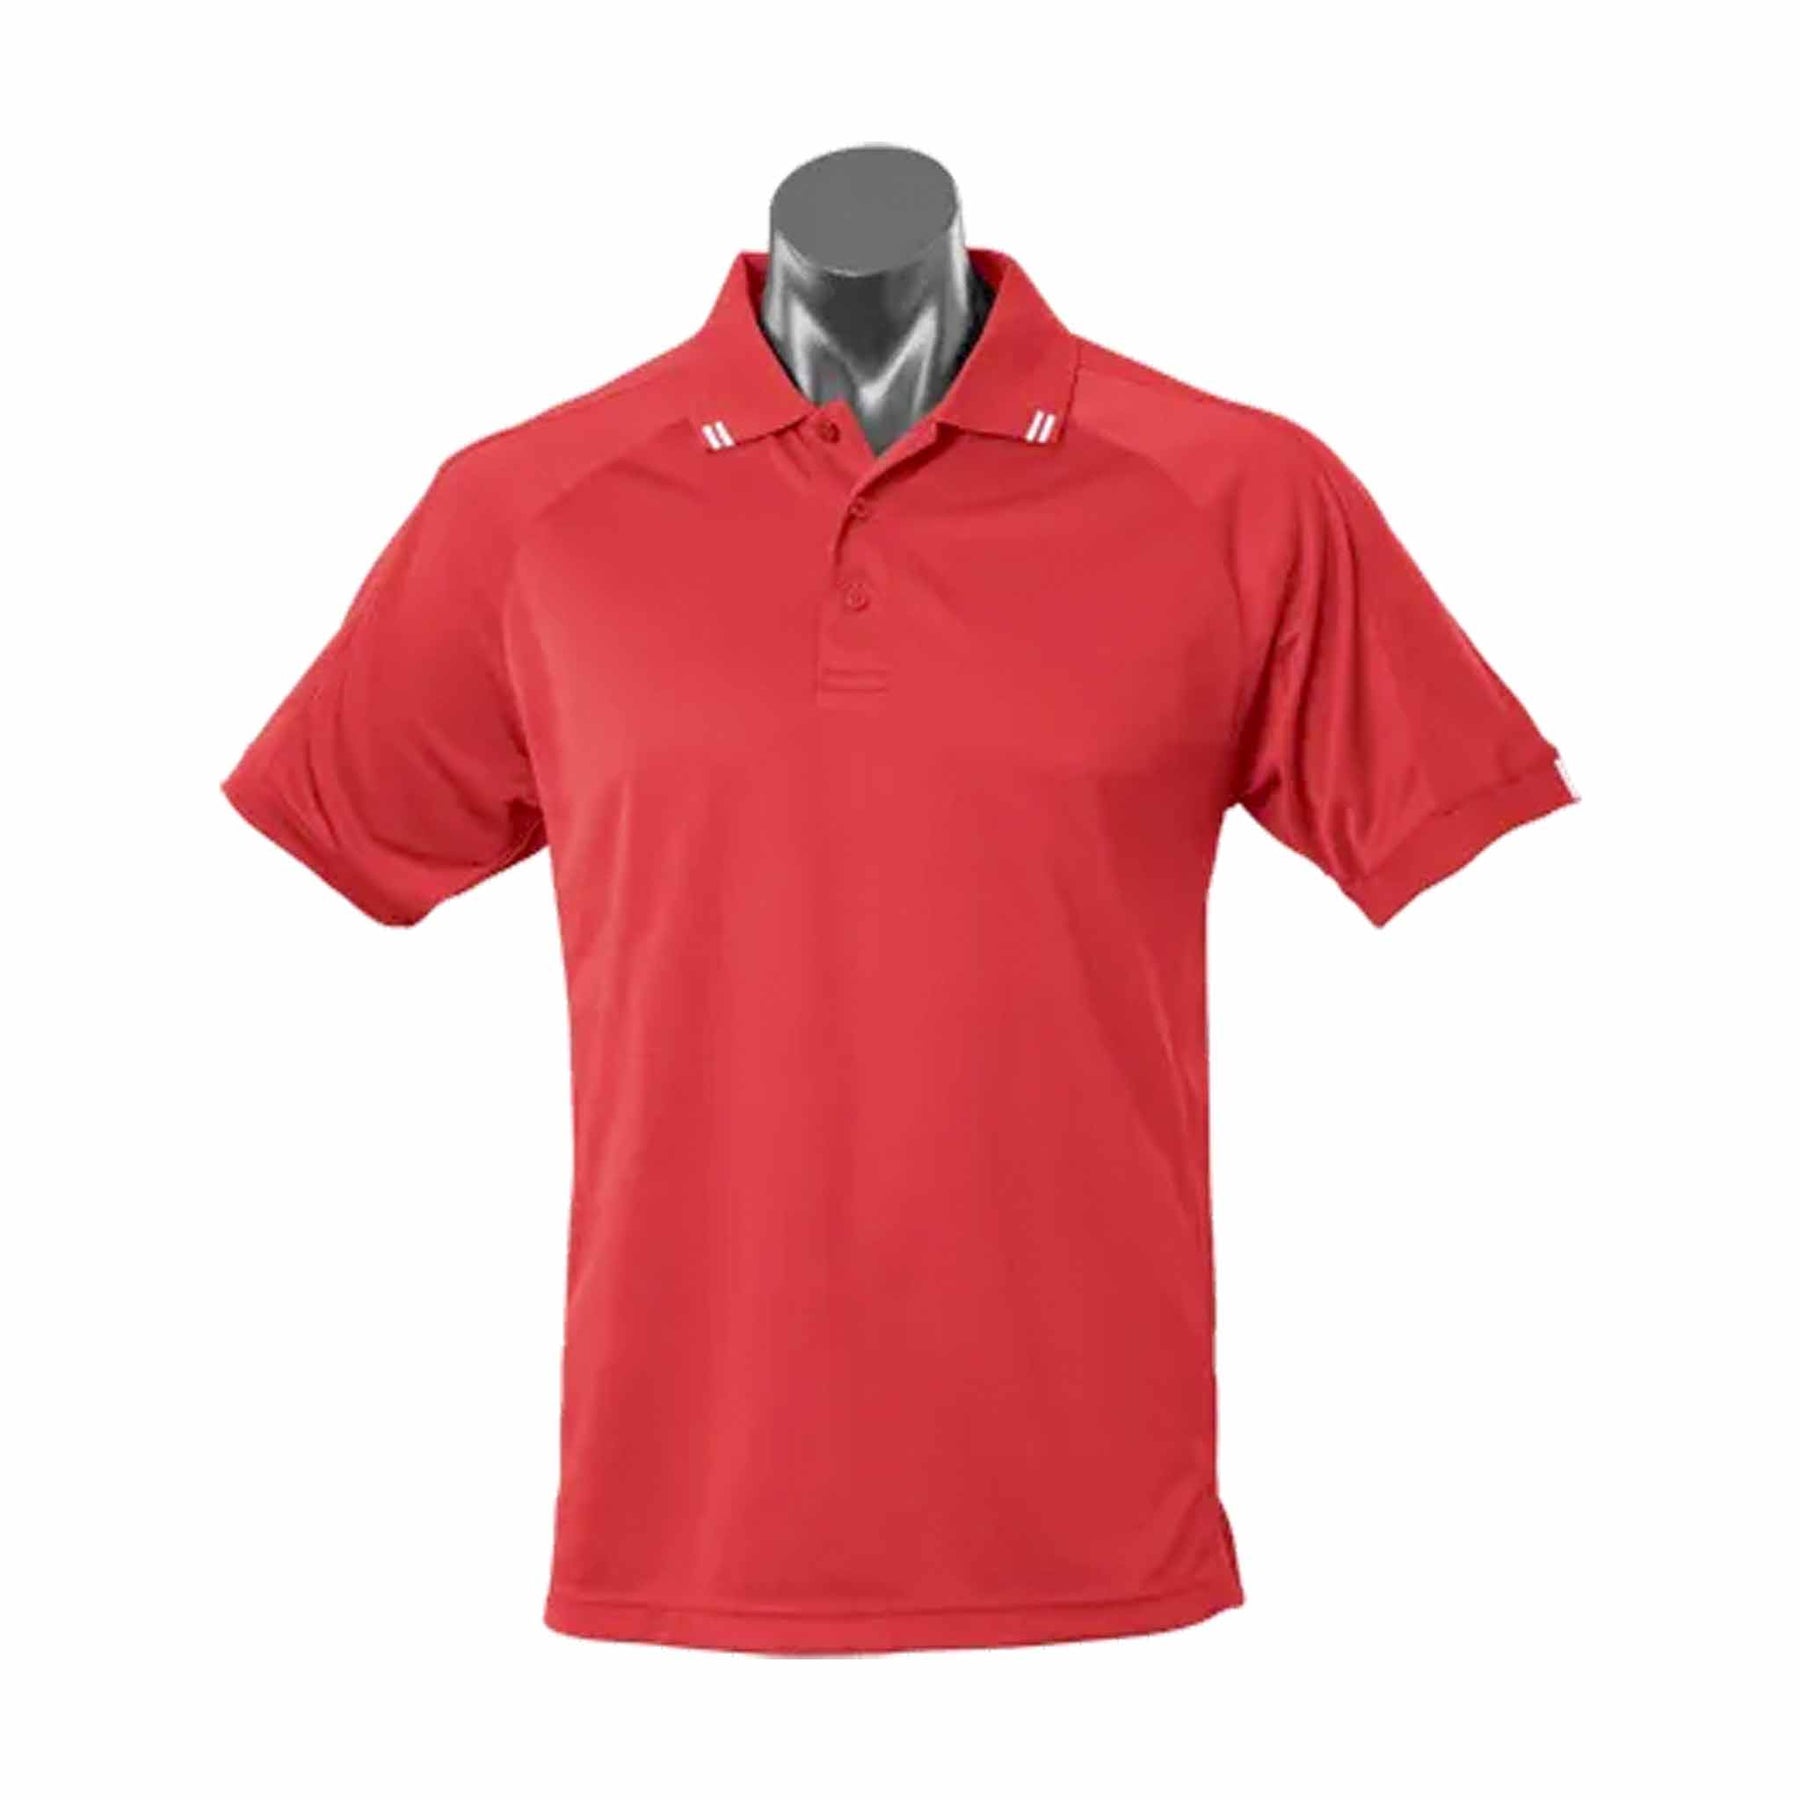 aussie pacific flinders polo in red white